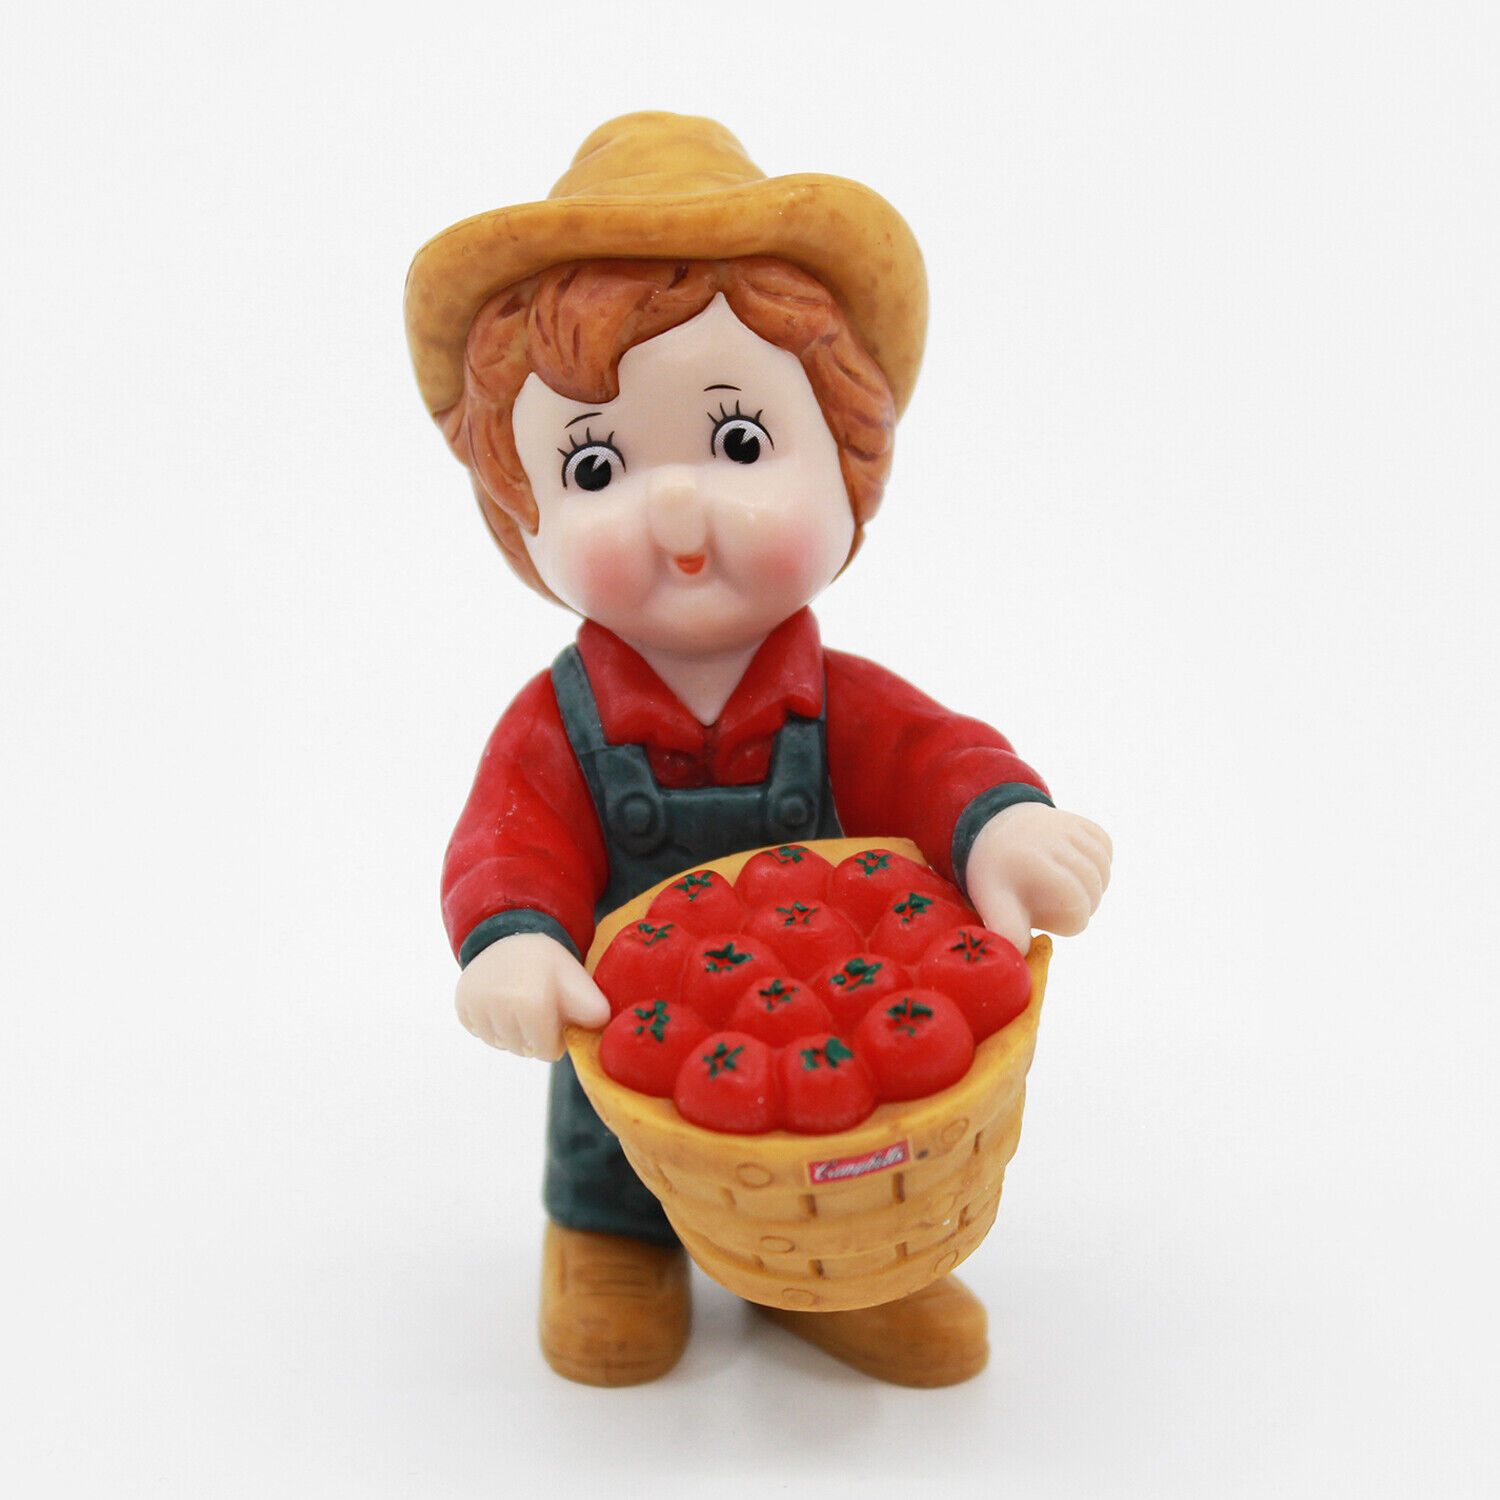 Campbell's Soup 2008 Christmas Ornament - Farmer Boy With Basket Of Tomatoes